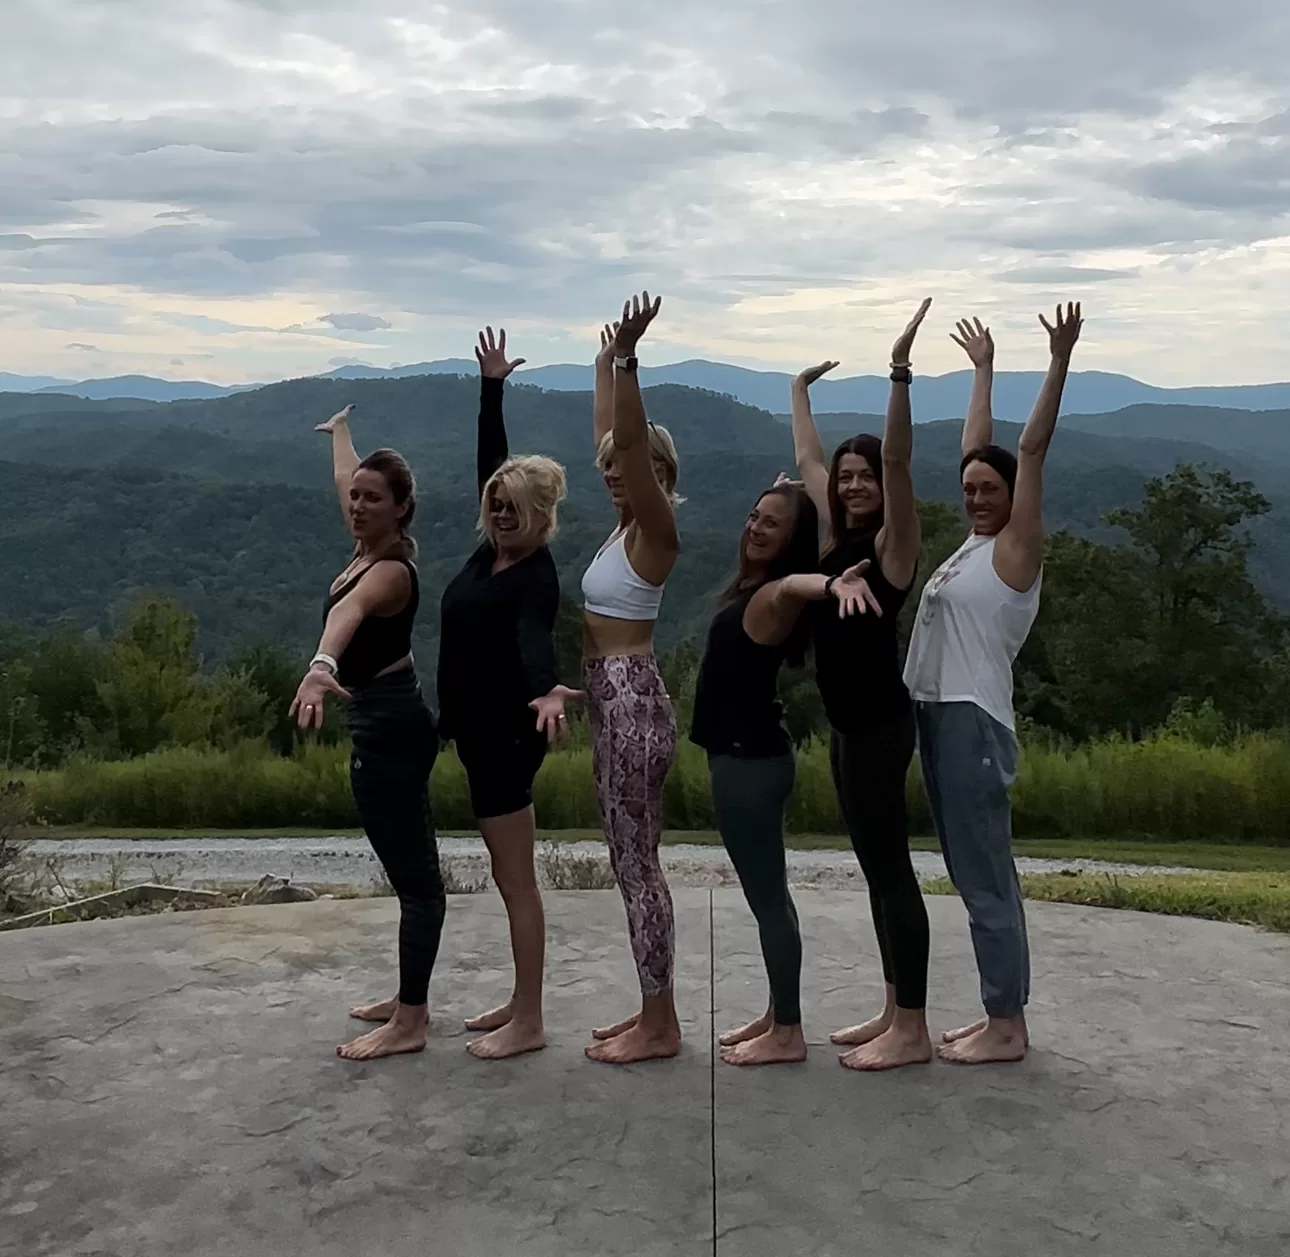 Yoga retreat for women in the Smoky Mountains, Hiking Retreat near Knoxville TN for women